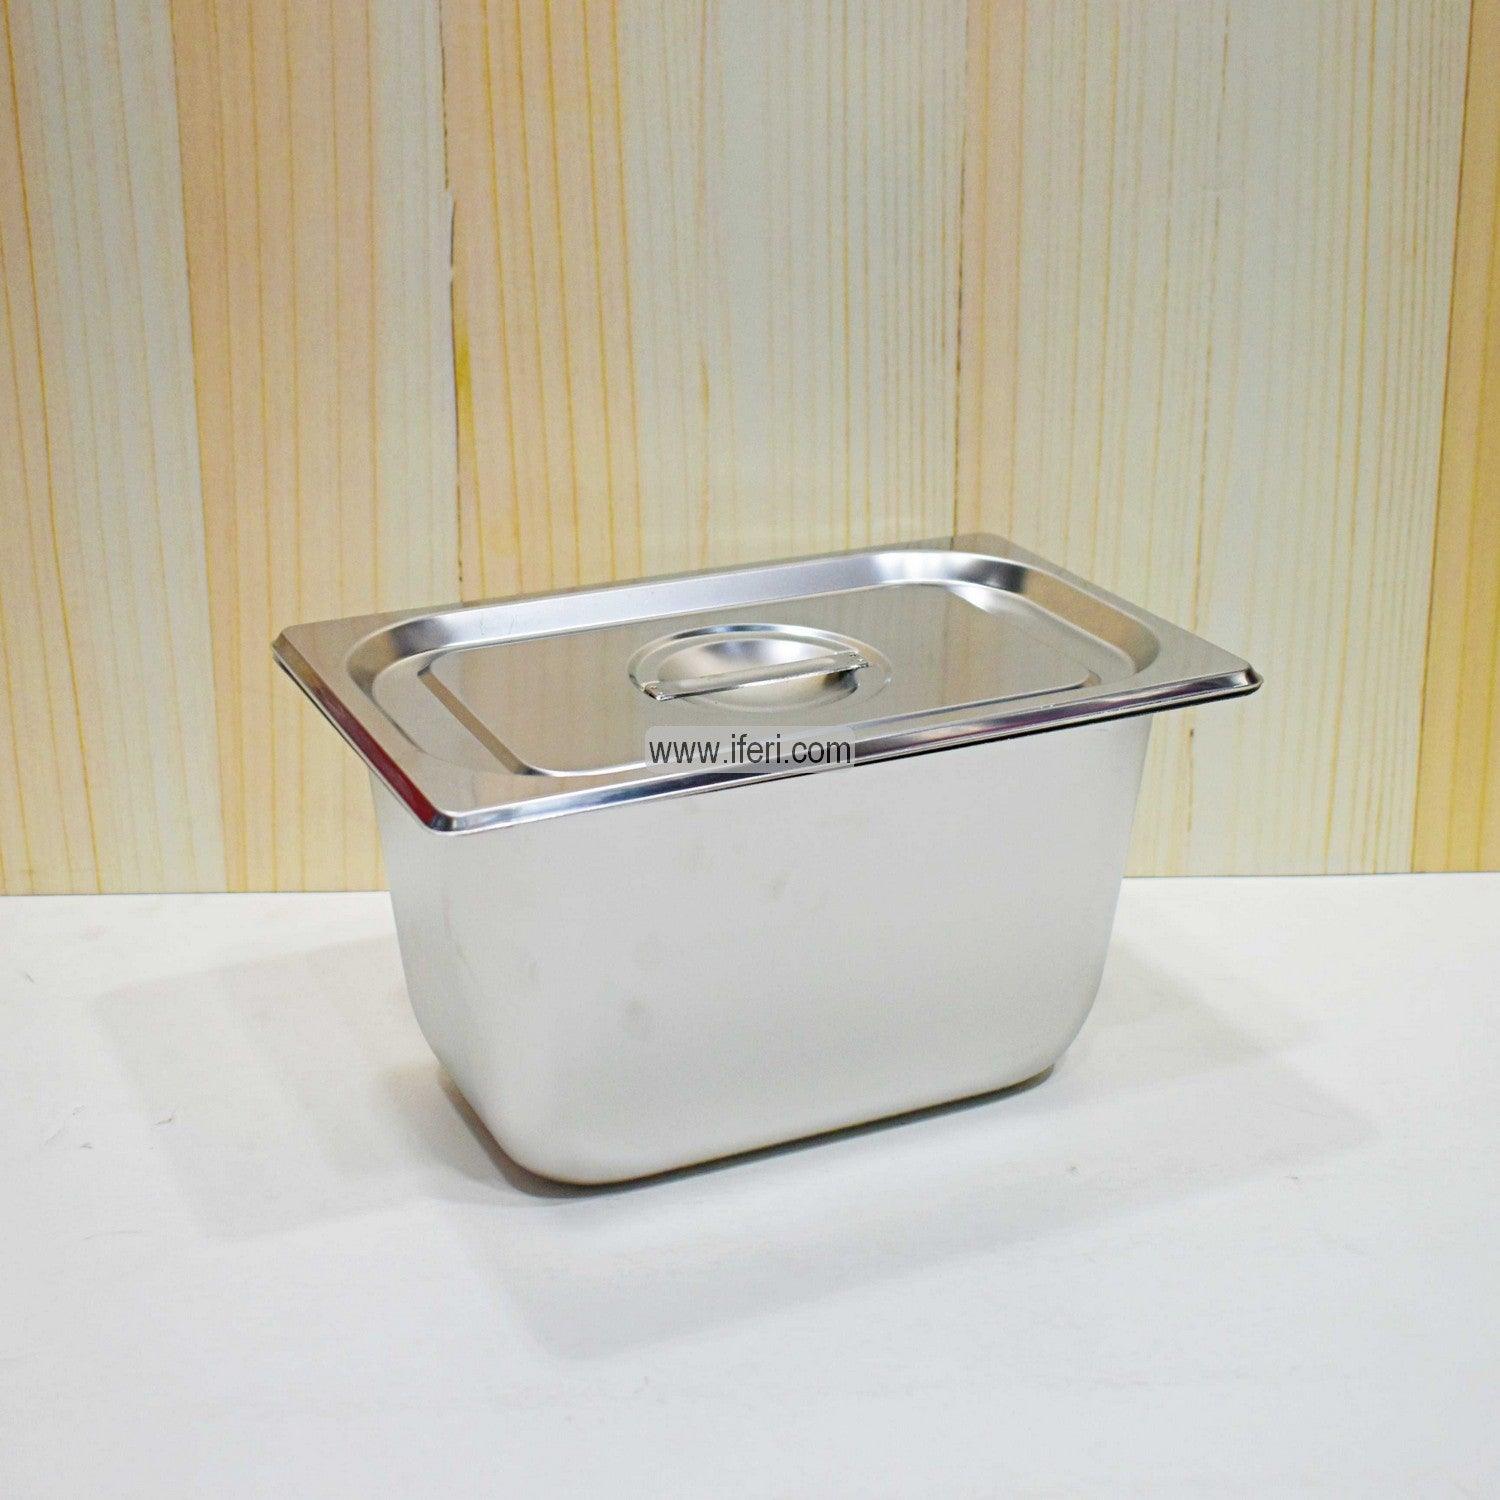 10.5 Inch Stainless Steel Food Pan with Lid SN0579 Price in Bangladesh - iferi.com